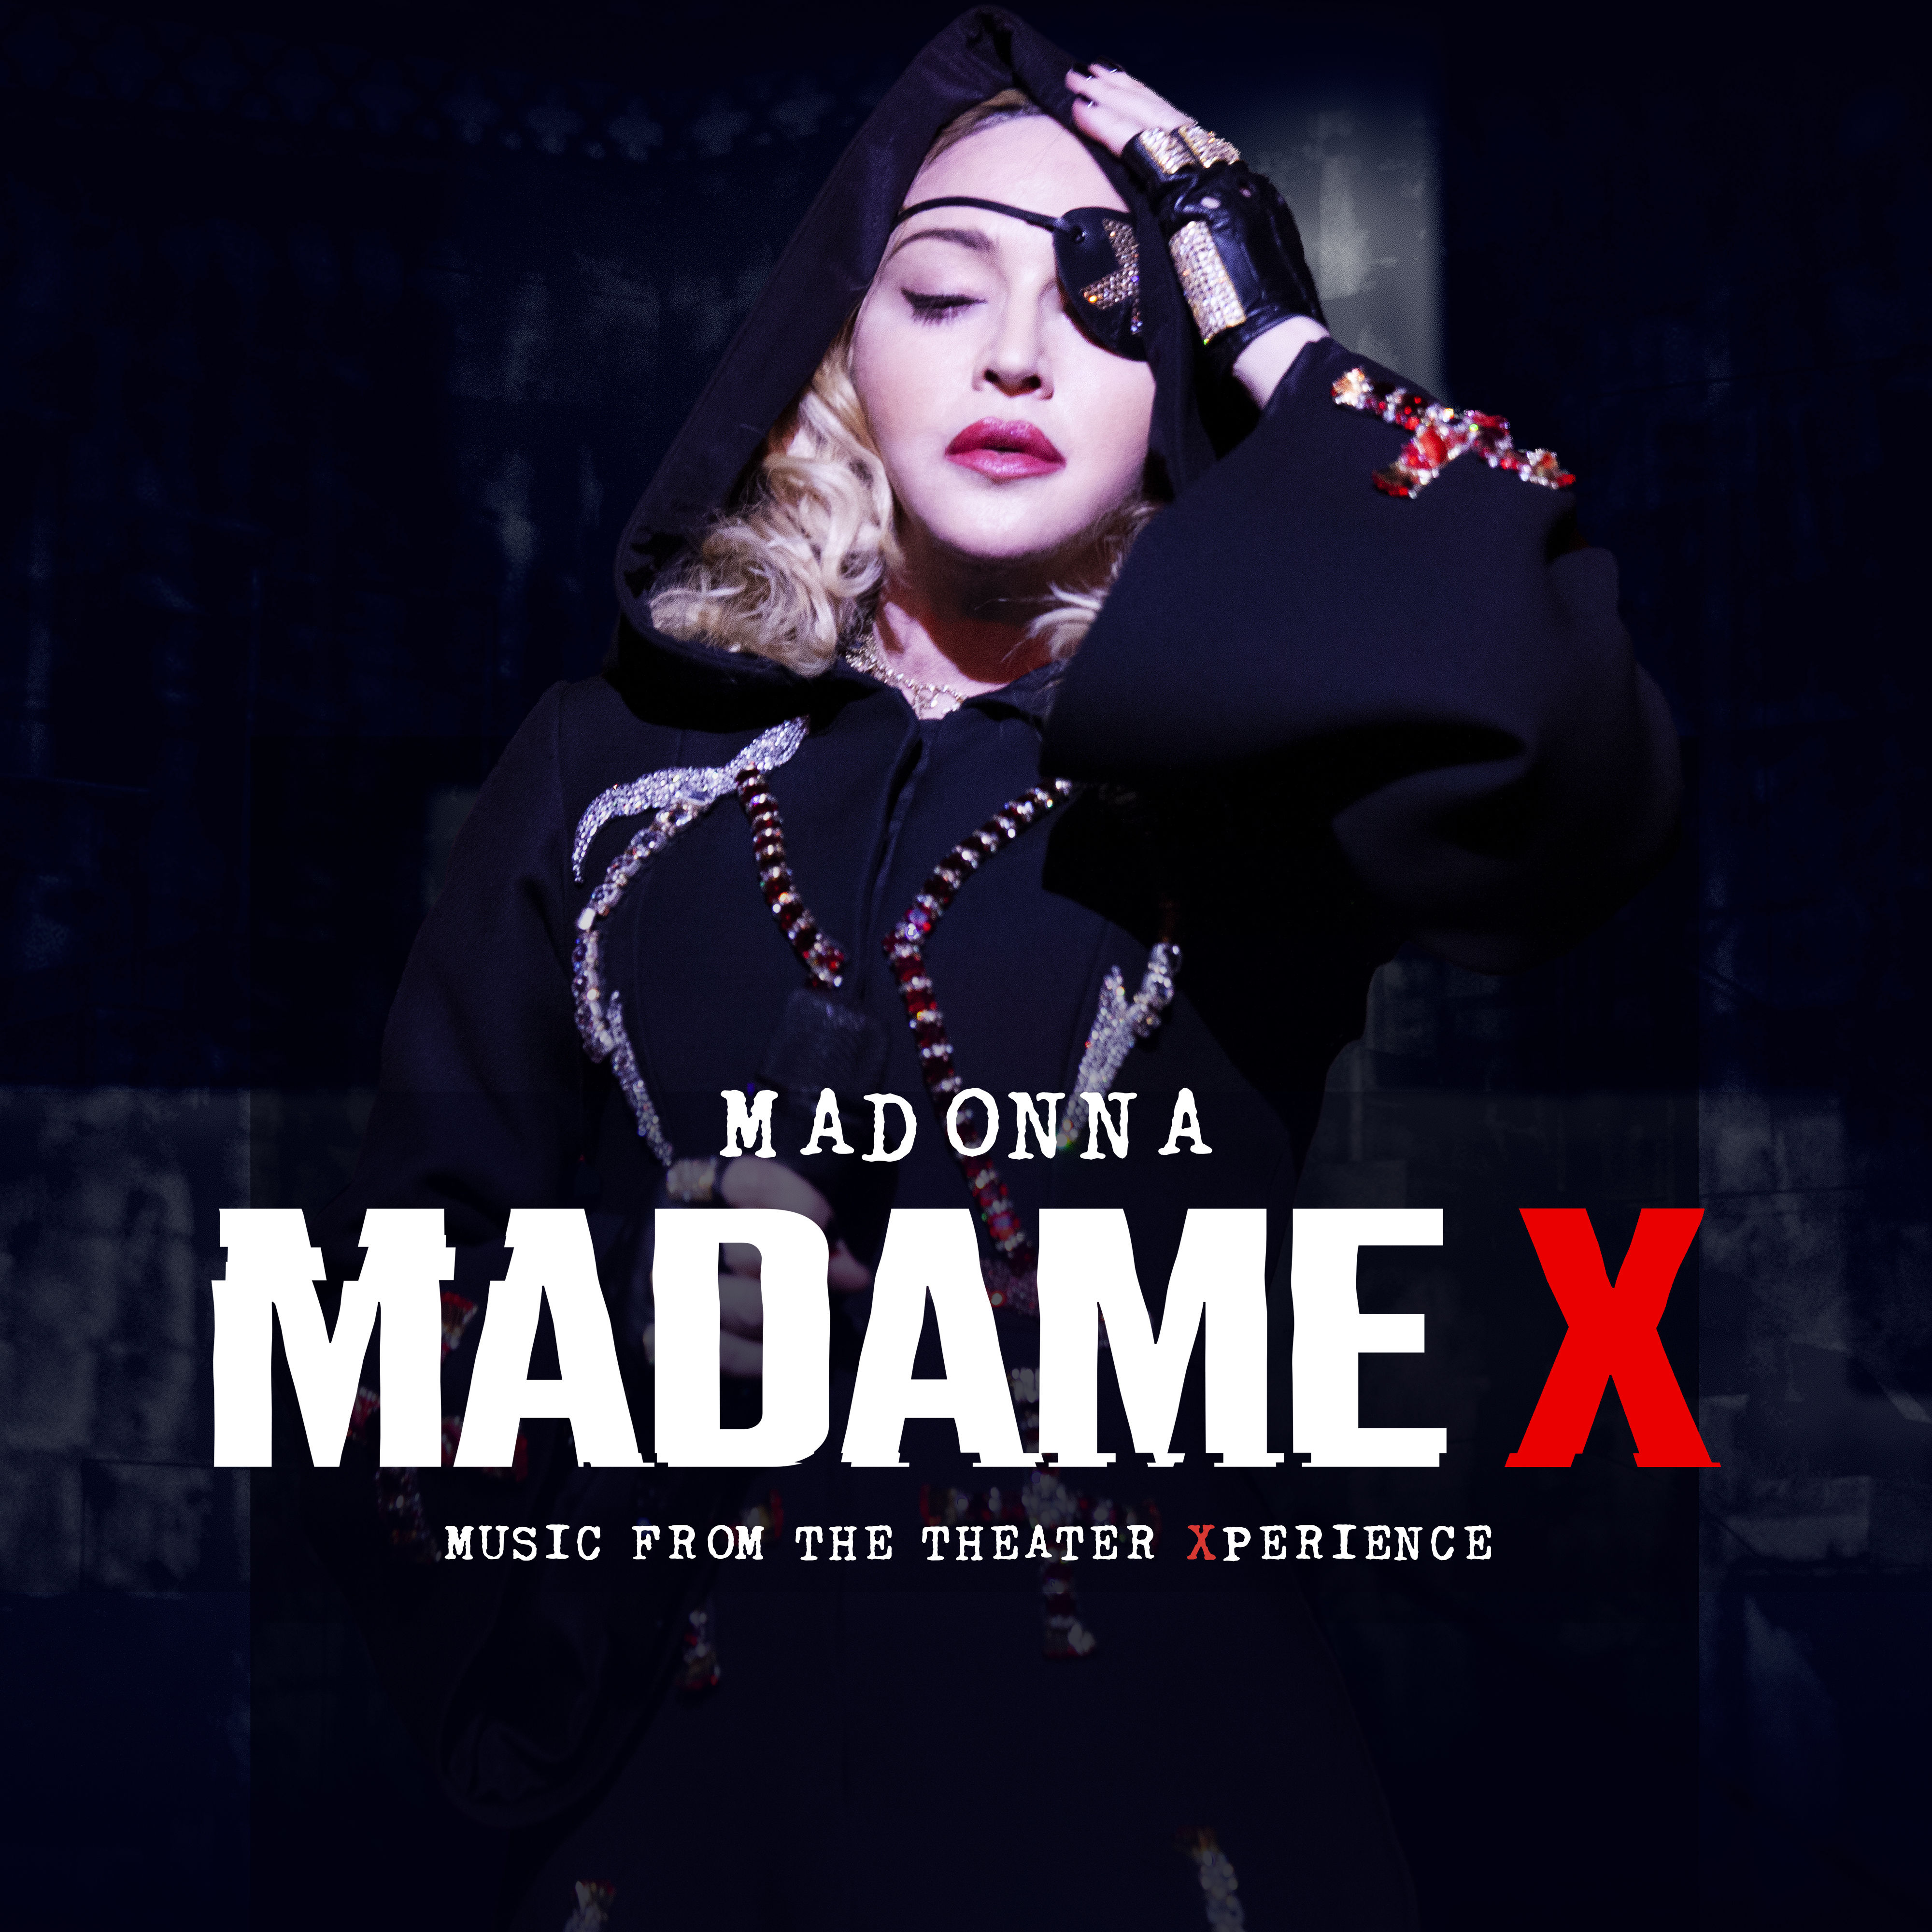 Madonna – Madame X – Music From The Theater Xperience (2021) [FLAC 24bit/48kHz]